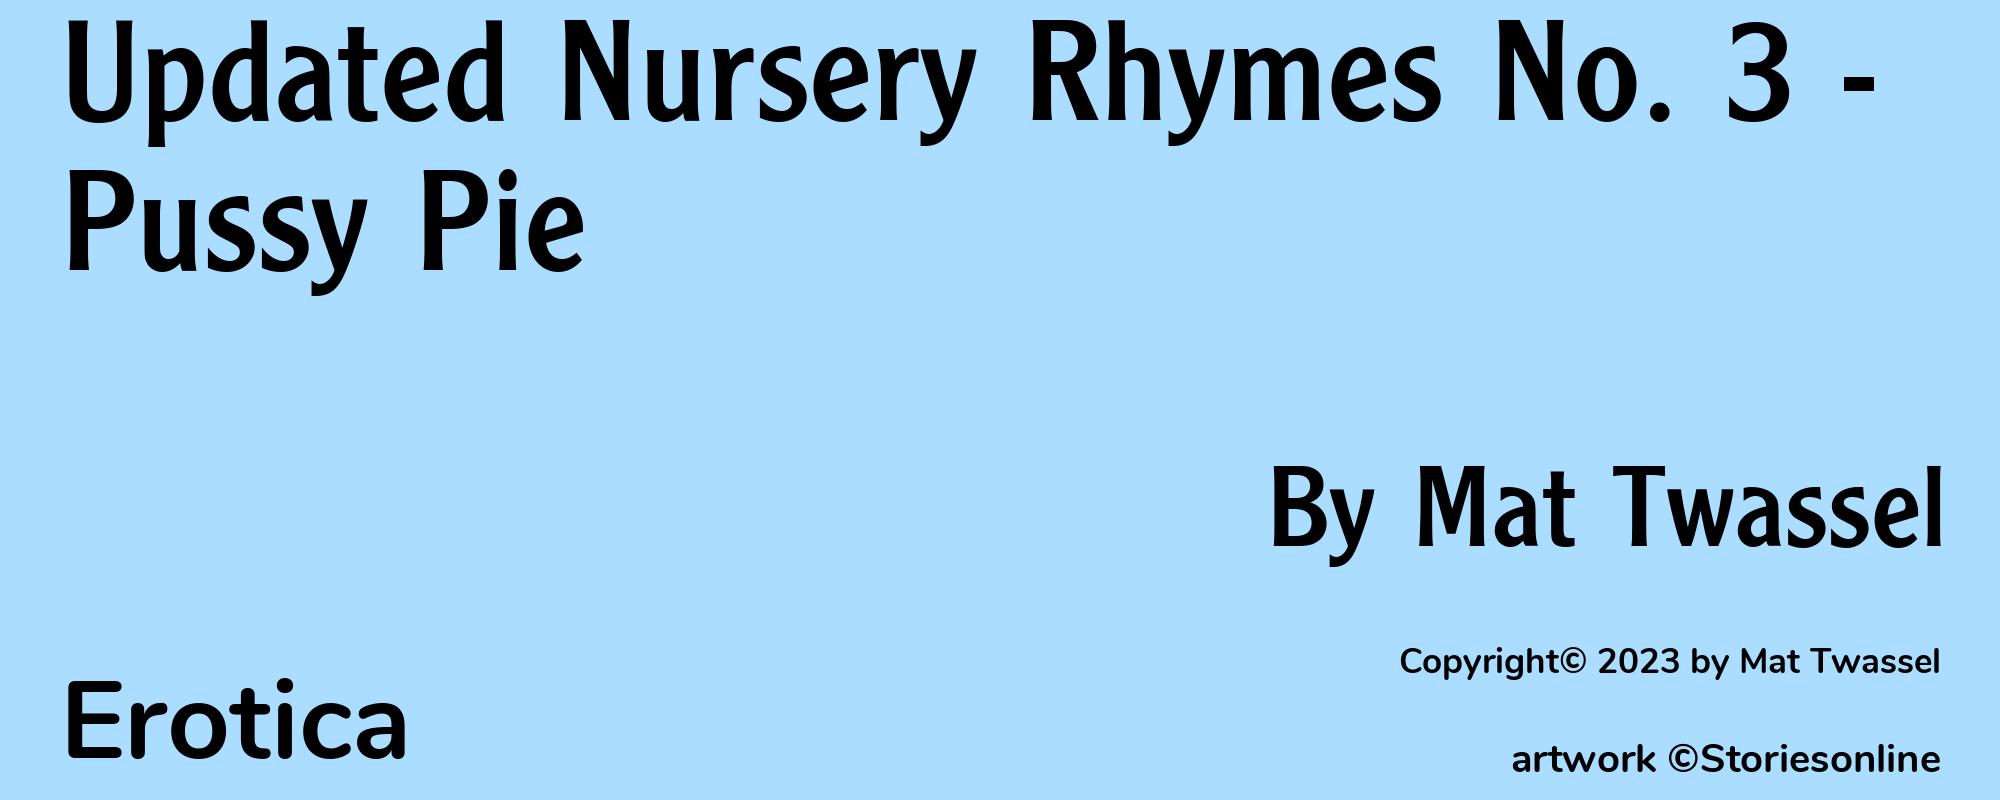 Updated Nursery Rhymes No. 3 - Pussy Pie - Cover